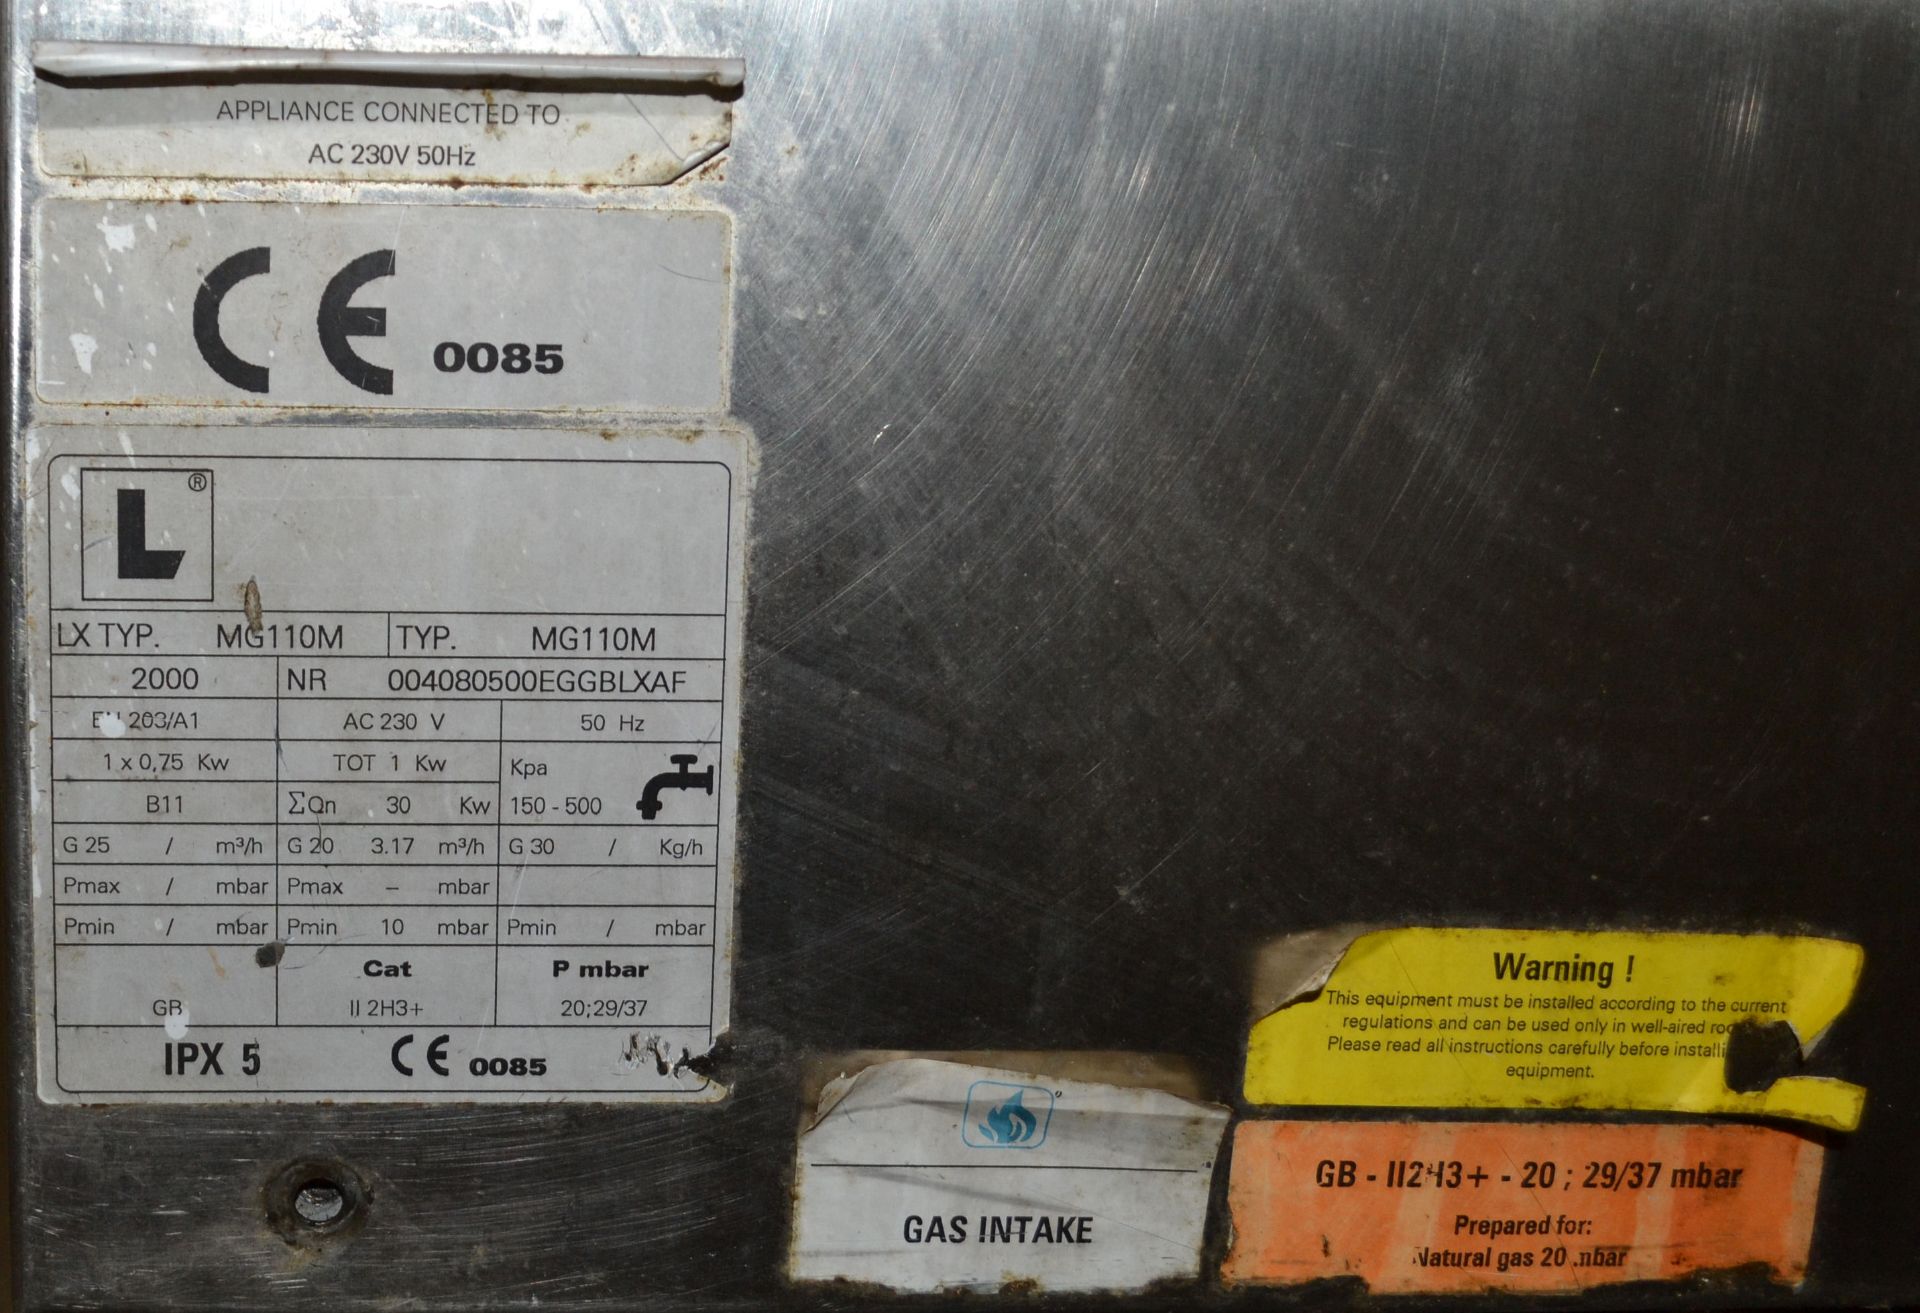 1 x Lainox MG110M LX Type Combination Oven with Pan Capacity - Ref:NCE032 - CL007 - Location: Bolton - Image 7 of 15